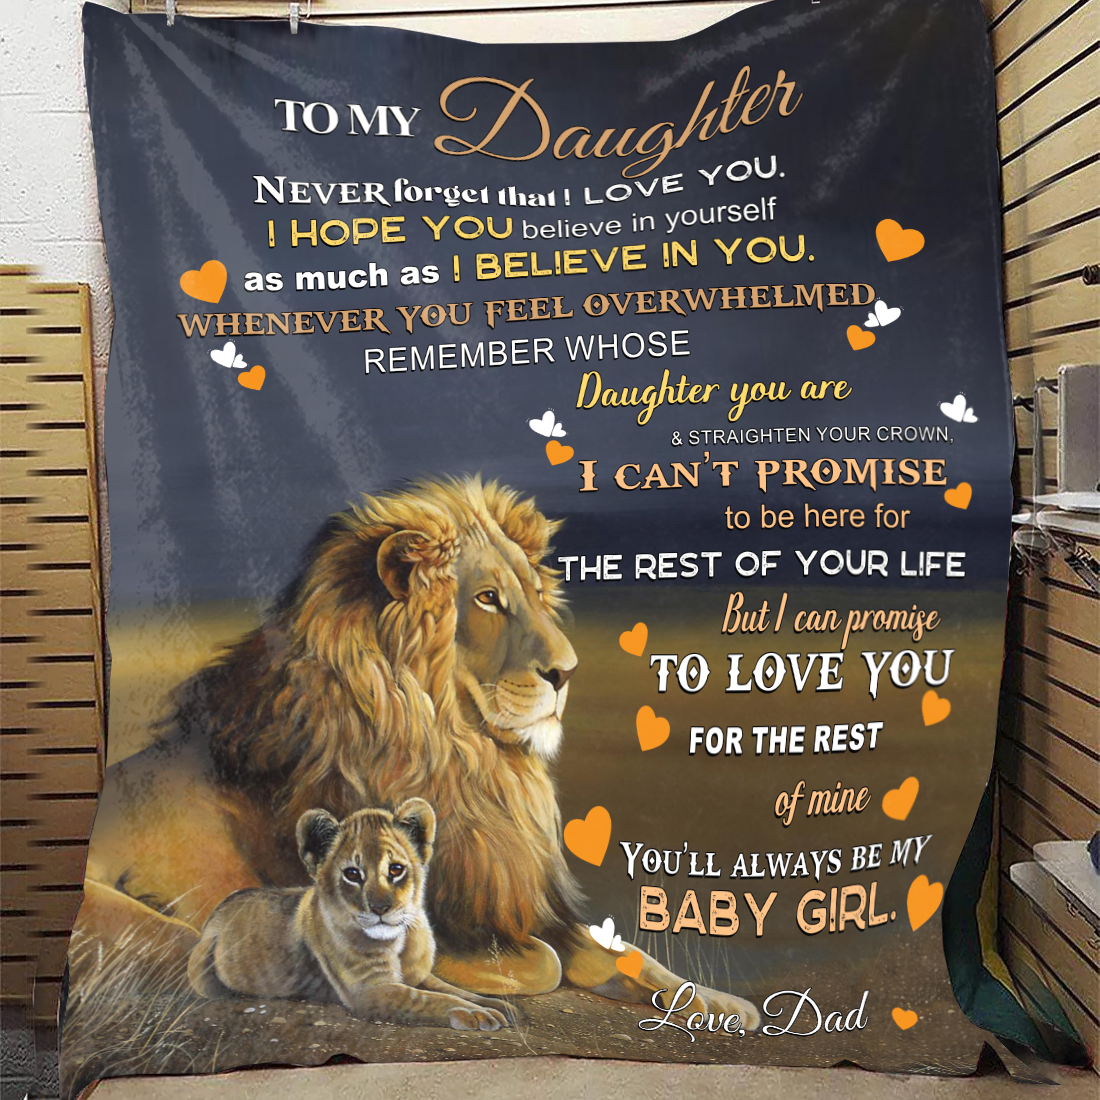 To My Daughter - You'll Always Be Premium Mink Sherpa Blanket 50x60